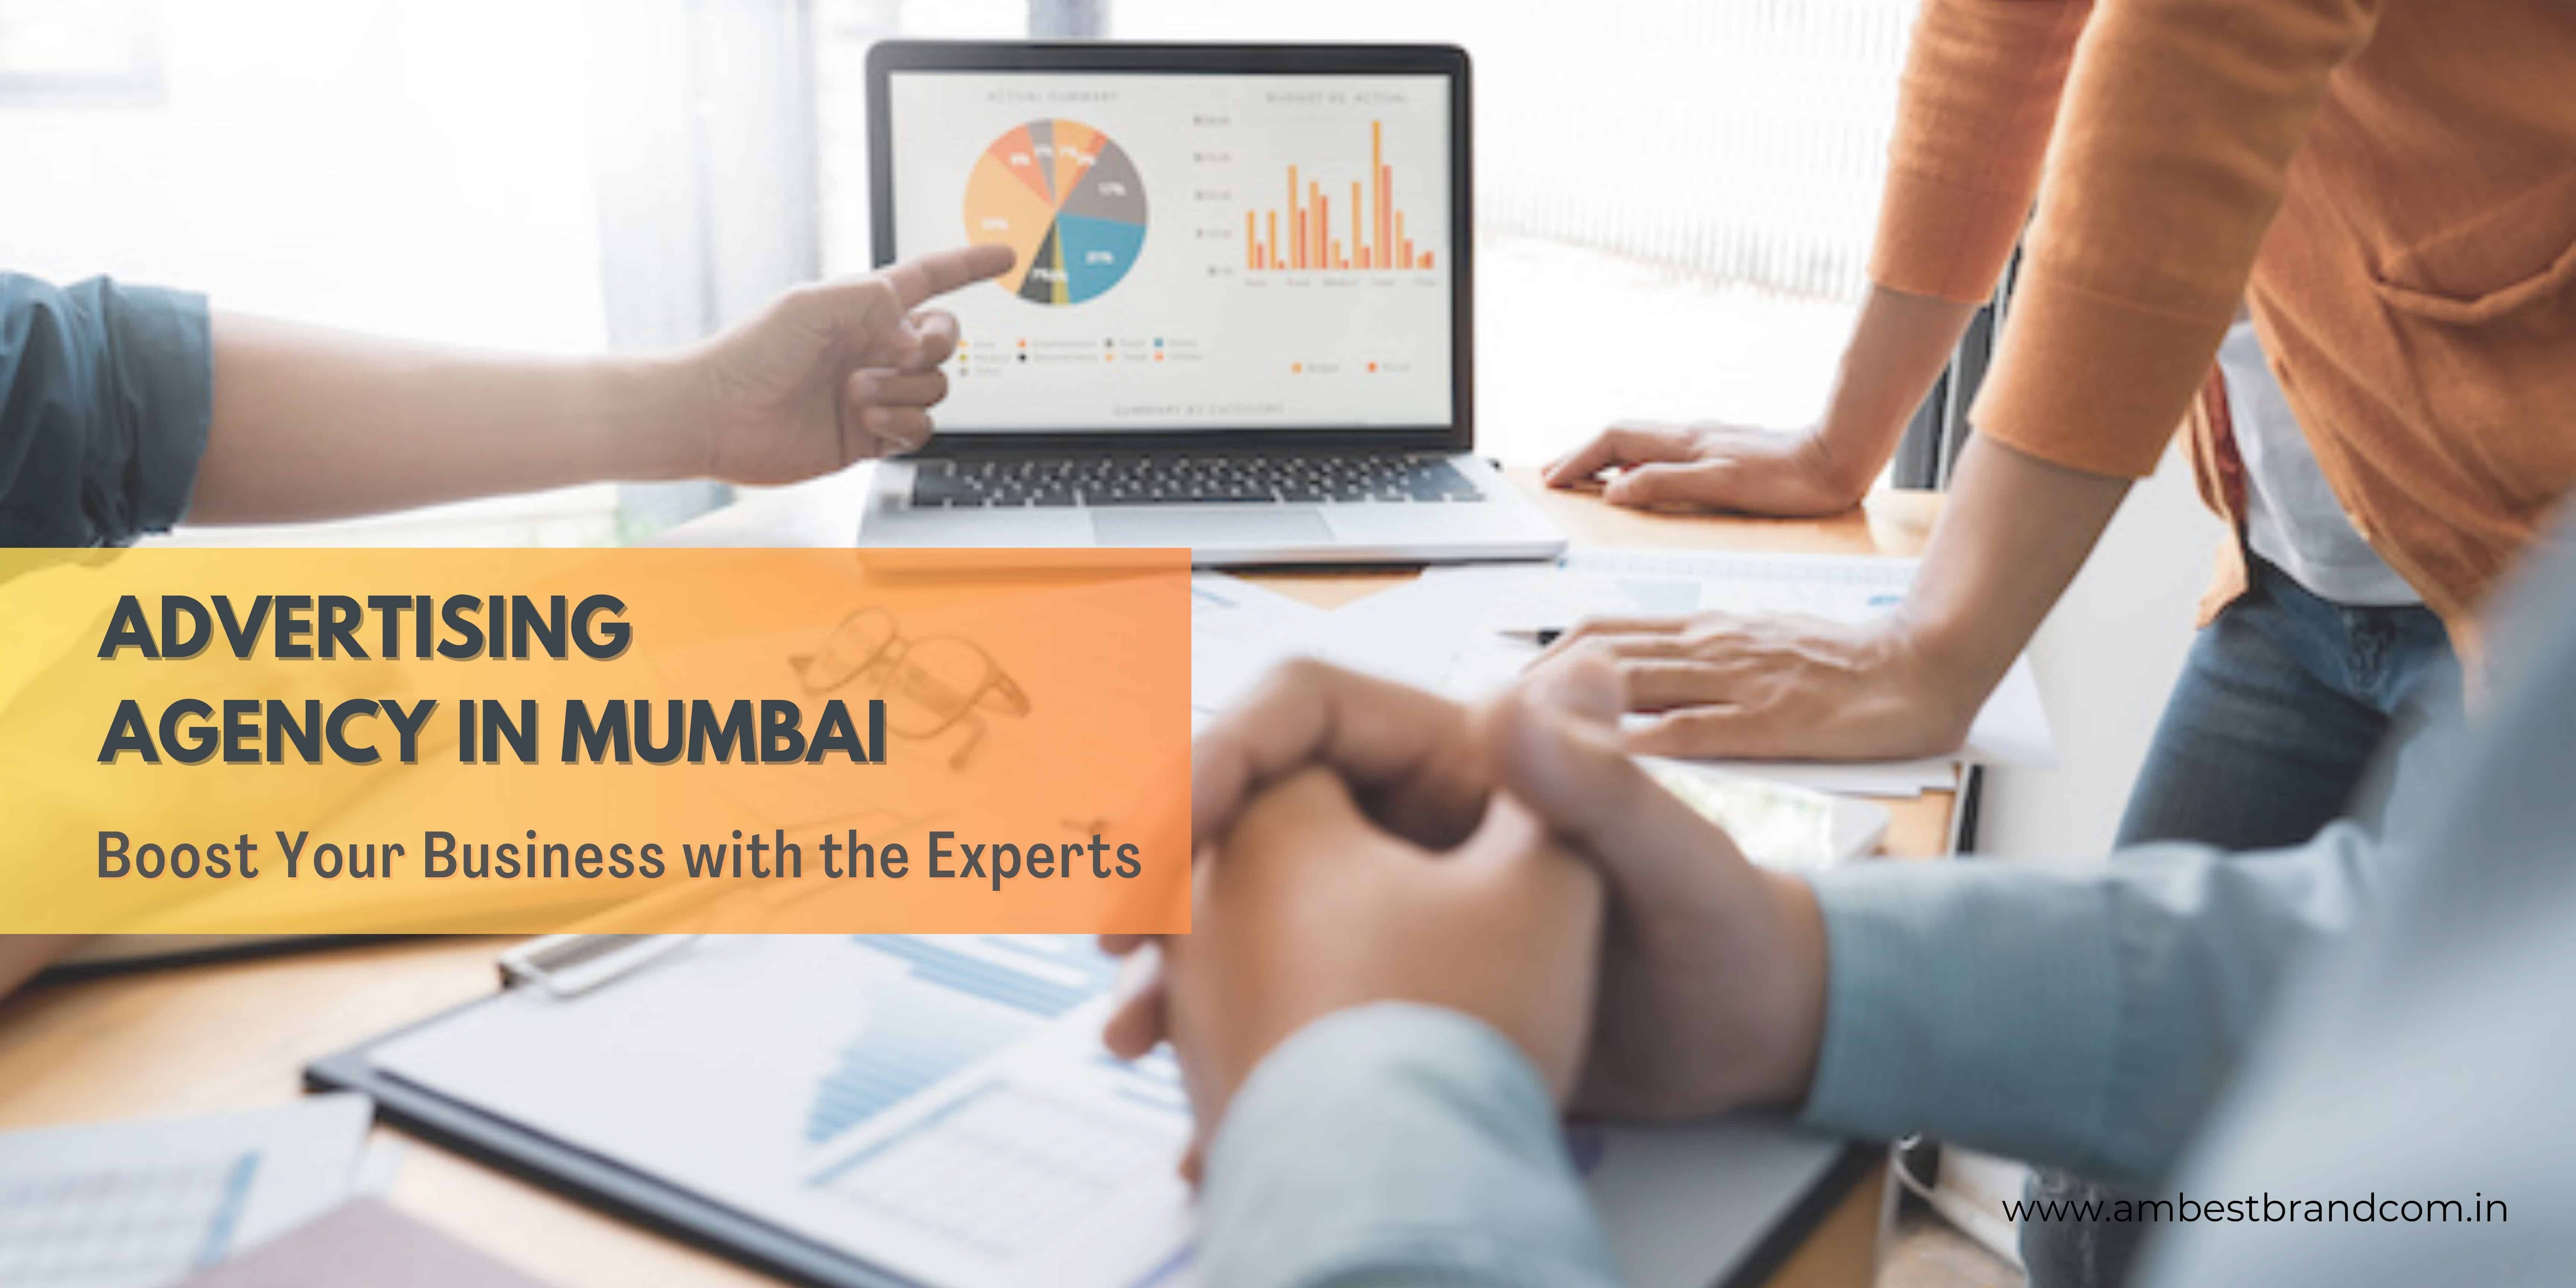 Advertising Agency in Mumbai: Boost Your Business with the Experts